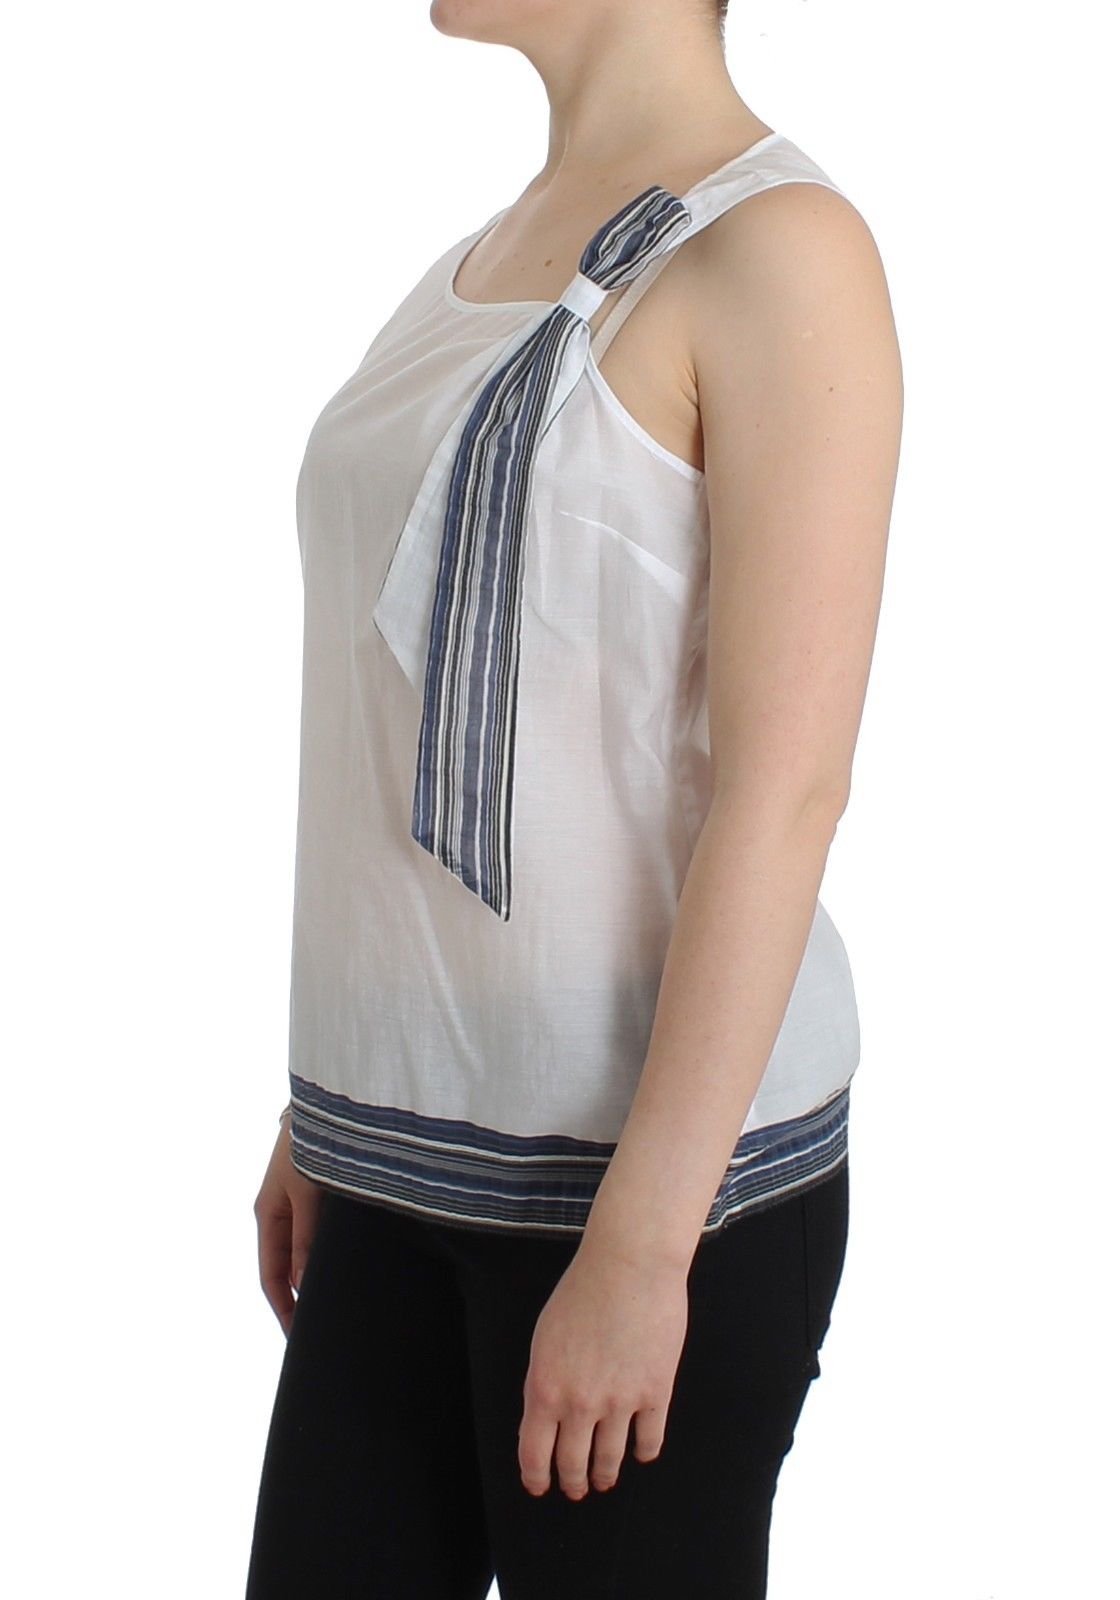 Buy White Blue Top Blouse Tank Shirt Sleeveless by Ermanno Scervino